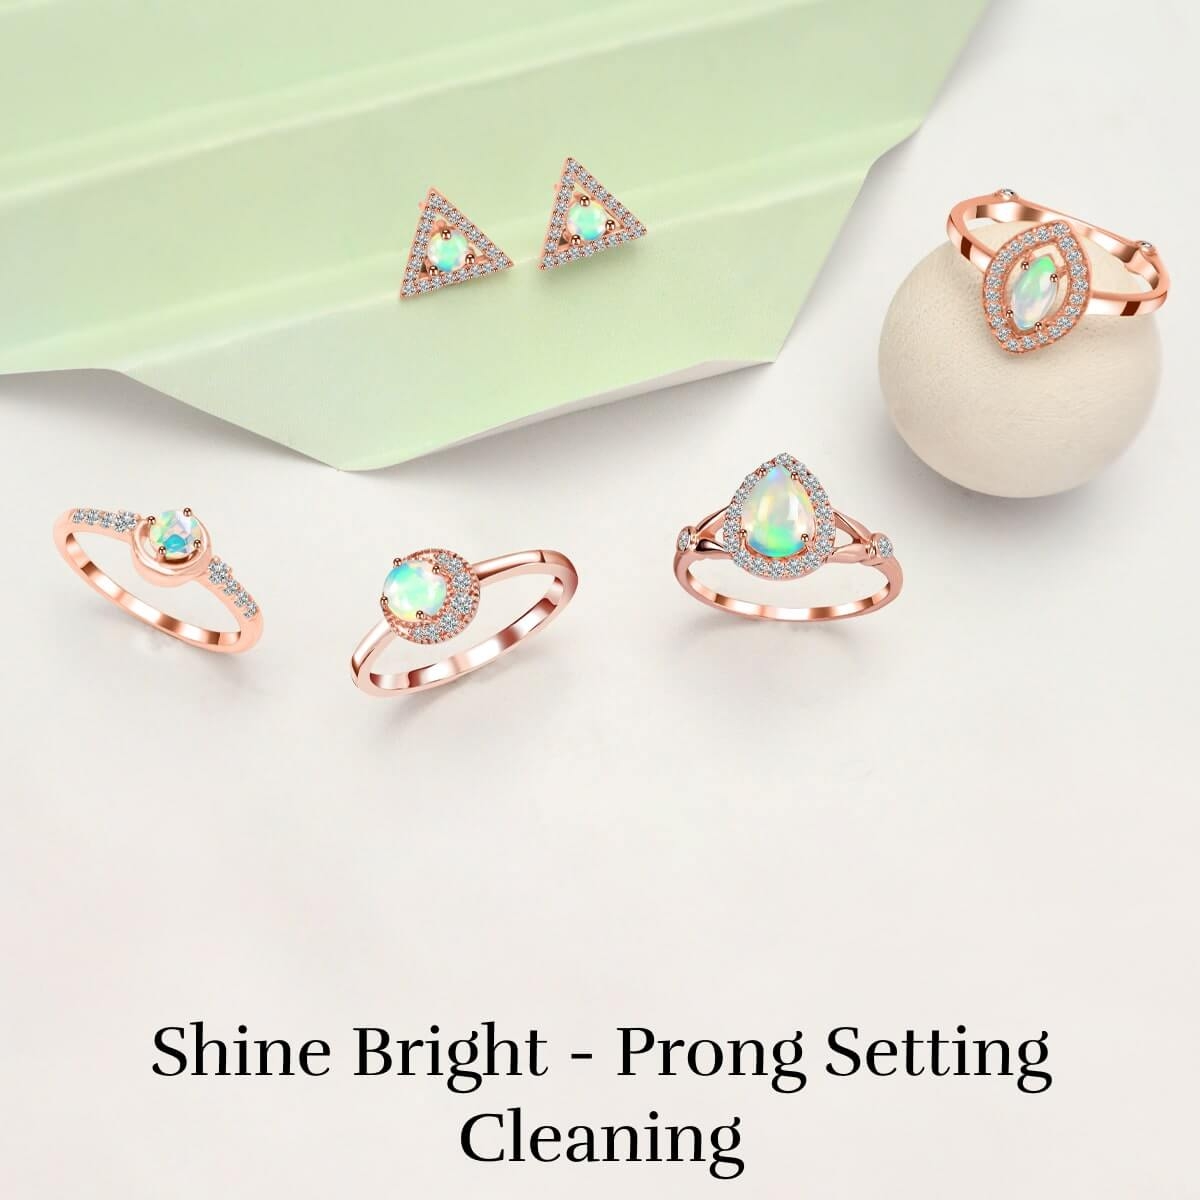 How to Clean a Prong Setting